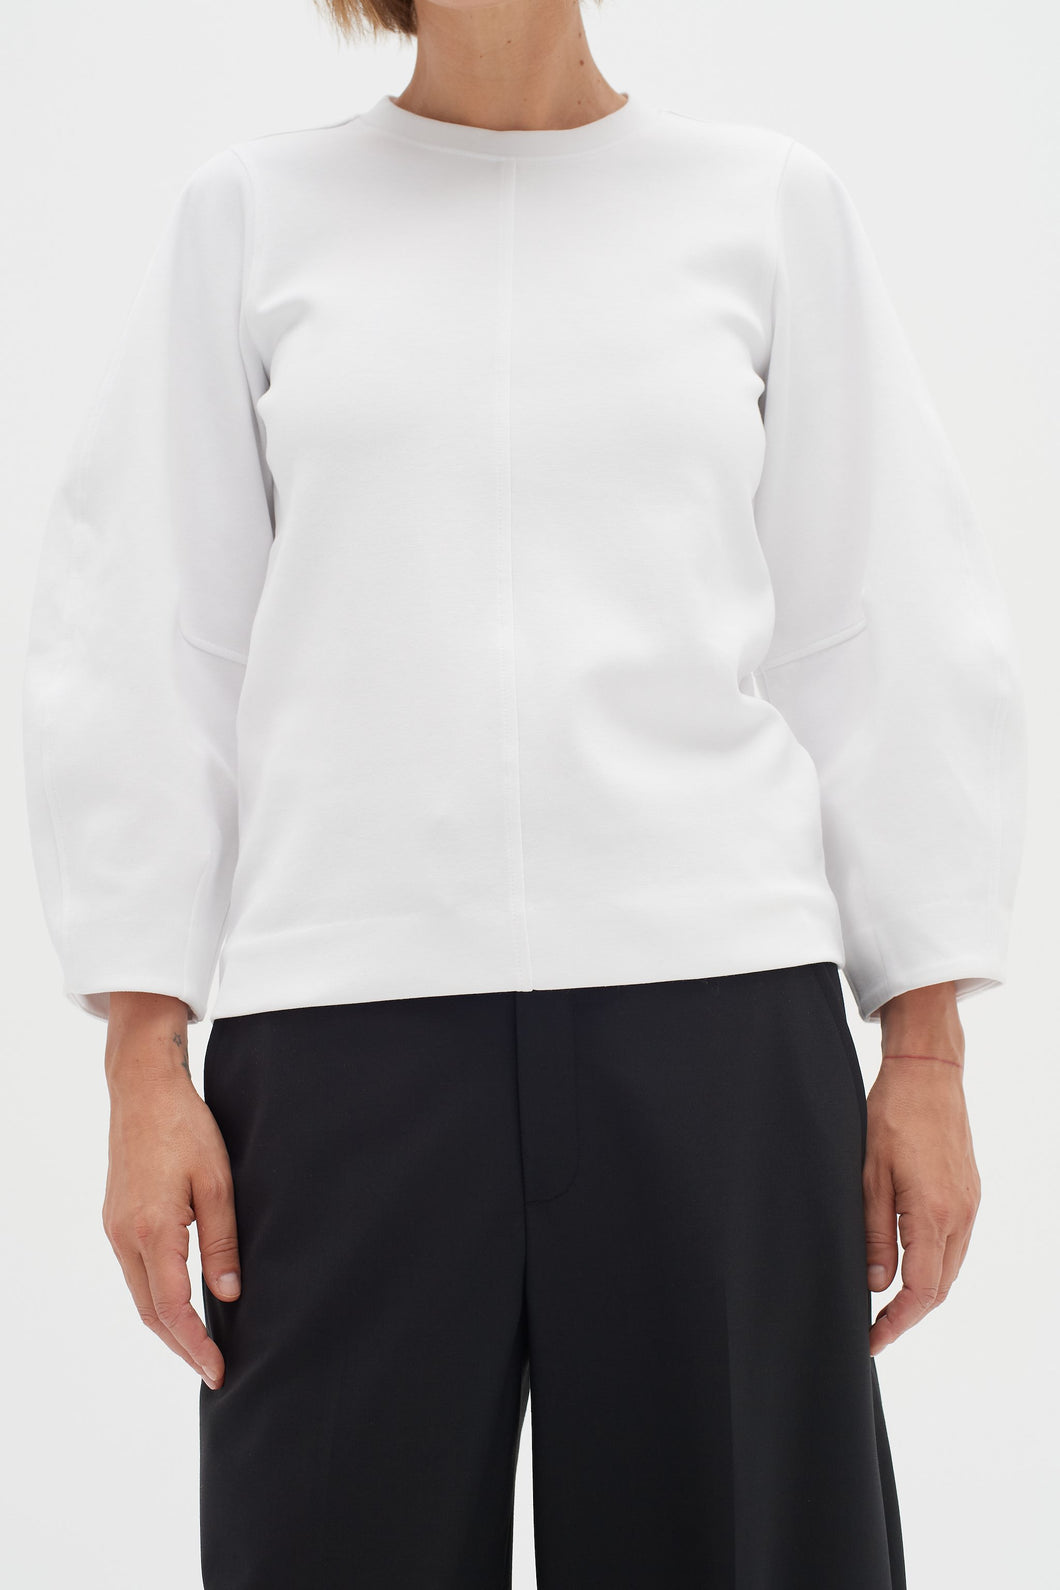 INWEAR<BR>
Marvin Top<BR>
Pure White<BR>